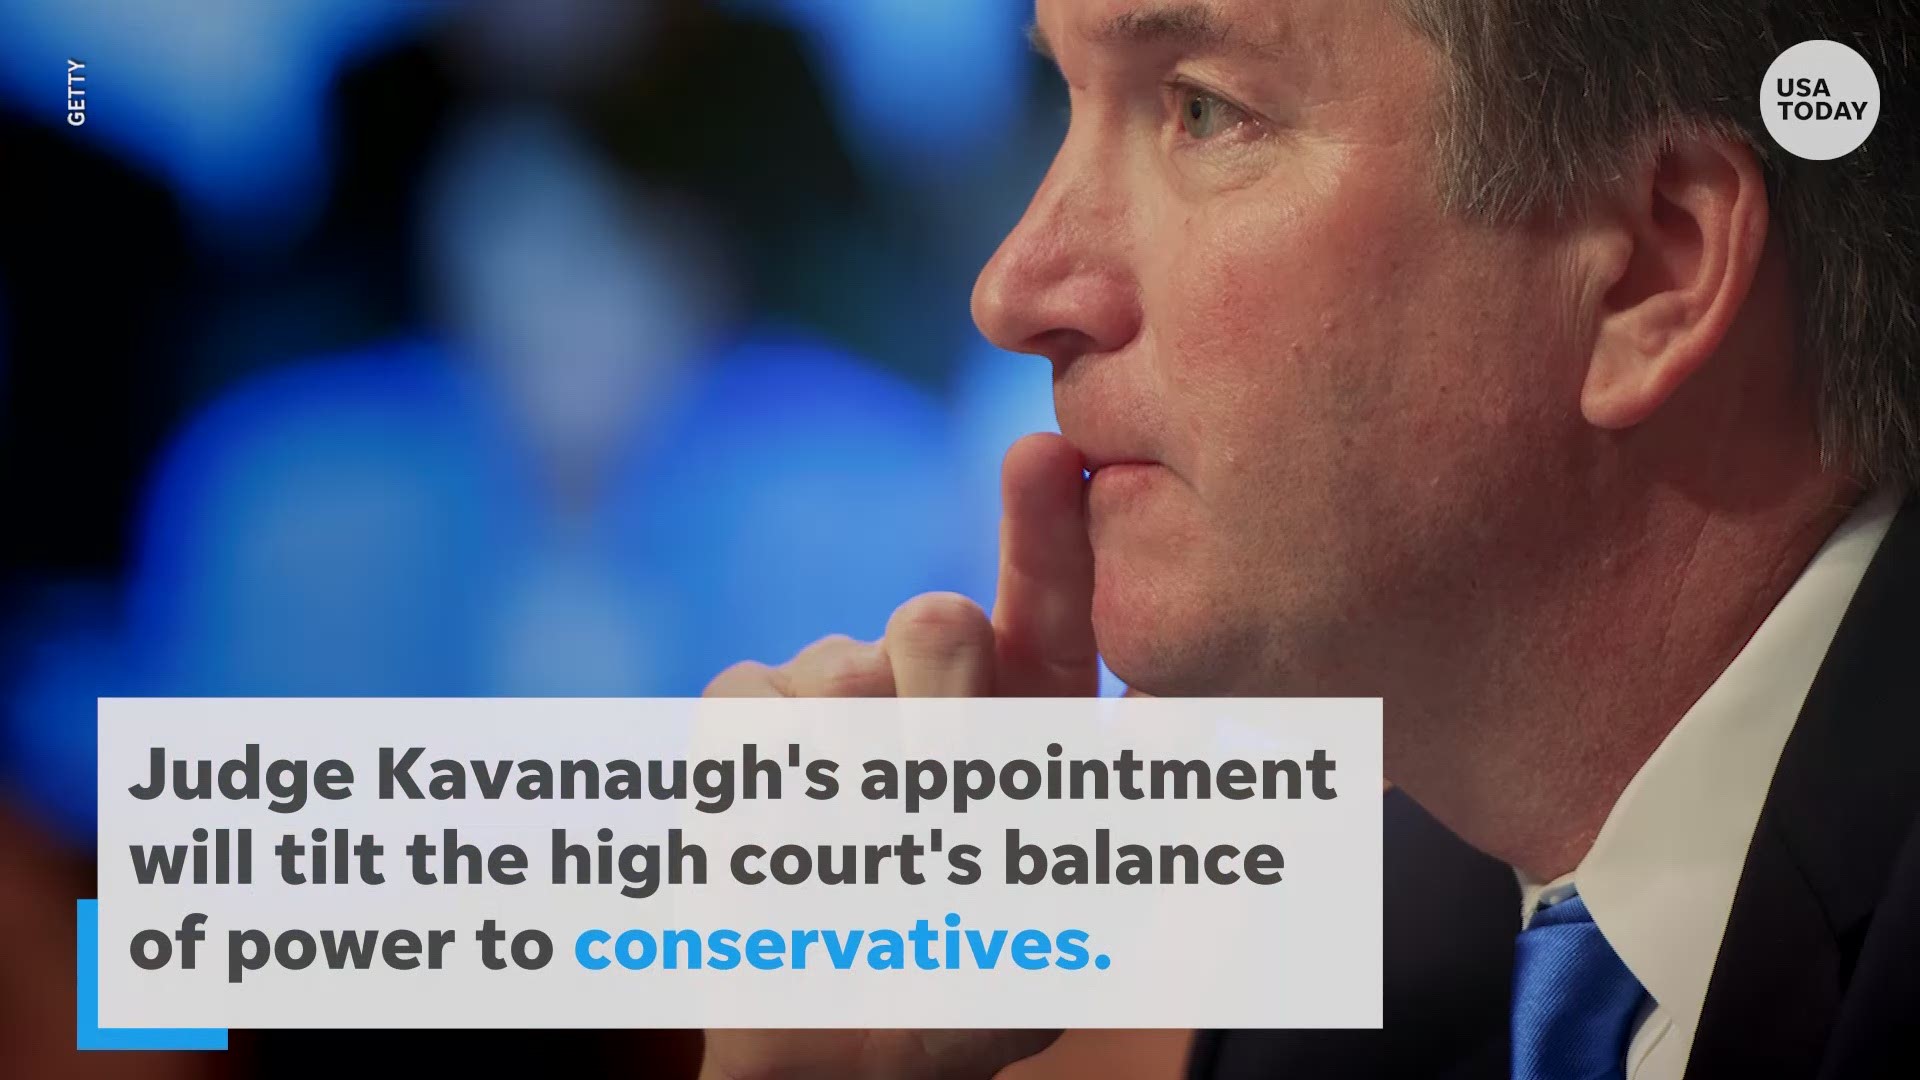 The polarizing battle over Supreme Court Justice Brett Kavanaugh has ended, but voter repercussions could be coming soon. USA TODAY